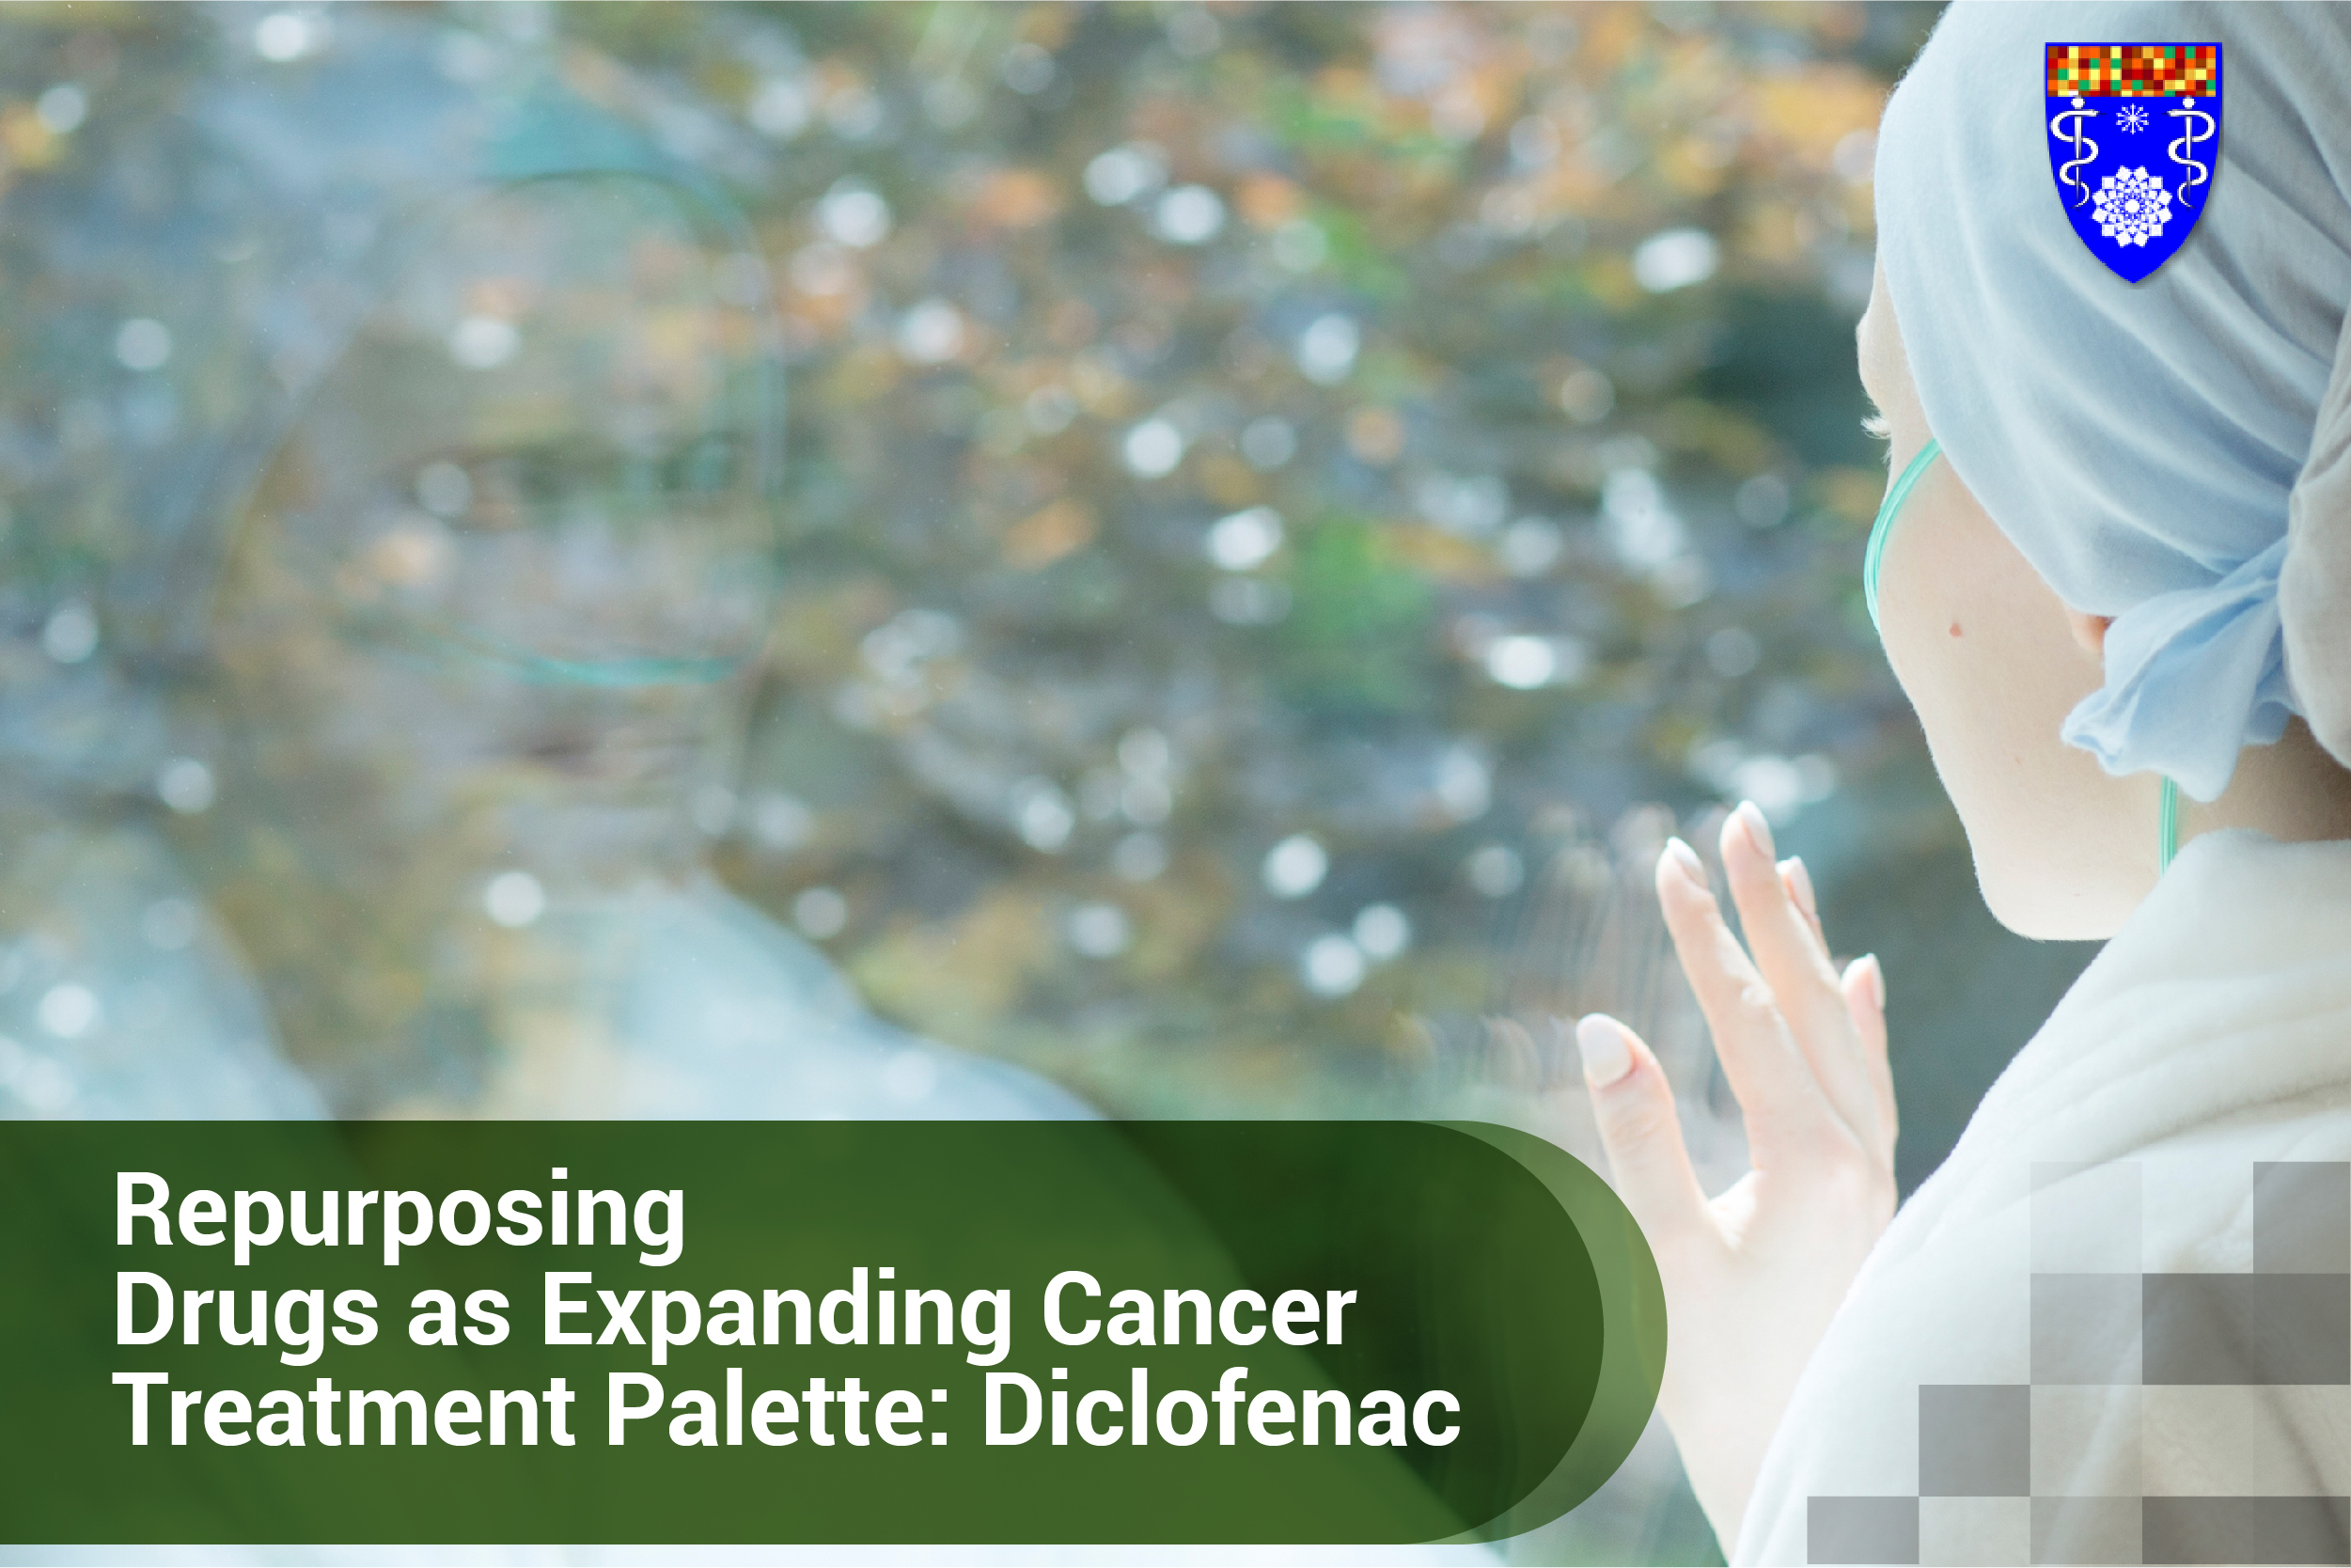 You are currently viewing Repurposing Drugs as Expanding Cancer Treatment Palette: Diclofenac